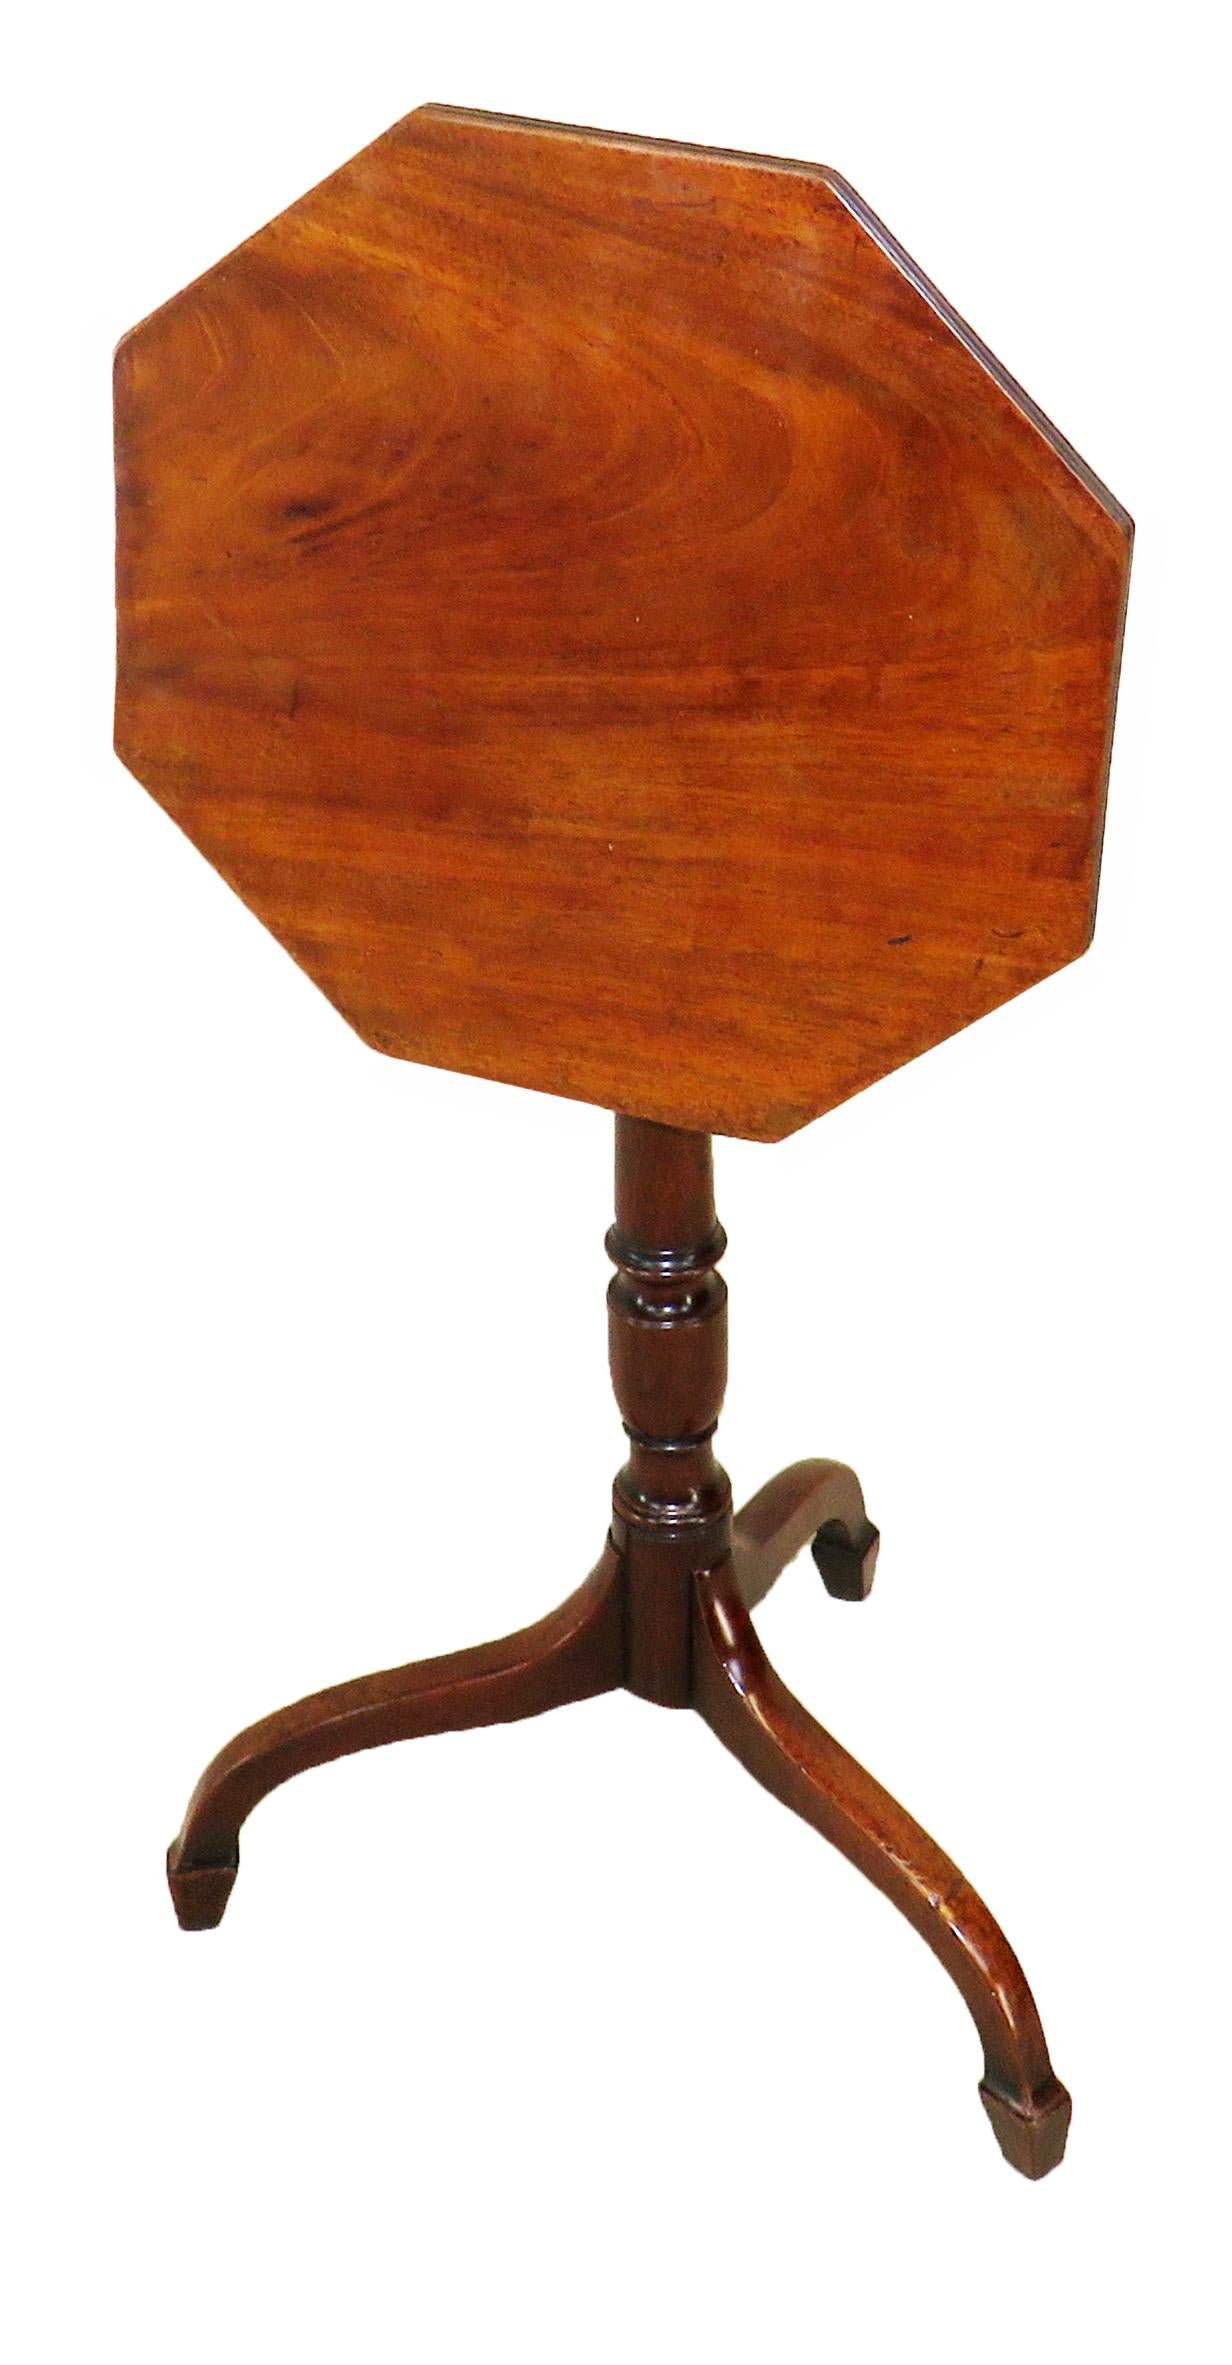 A charming George III period mahogany occasional
Wine table, or lamp table, having well figured
Octagonal tilting top with elegant fluted edge
Raised on turned central column and tripod legs

(This sweet little Georgian table retains an